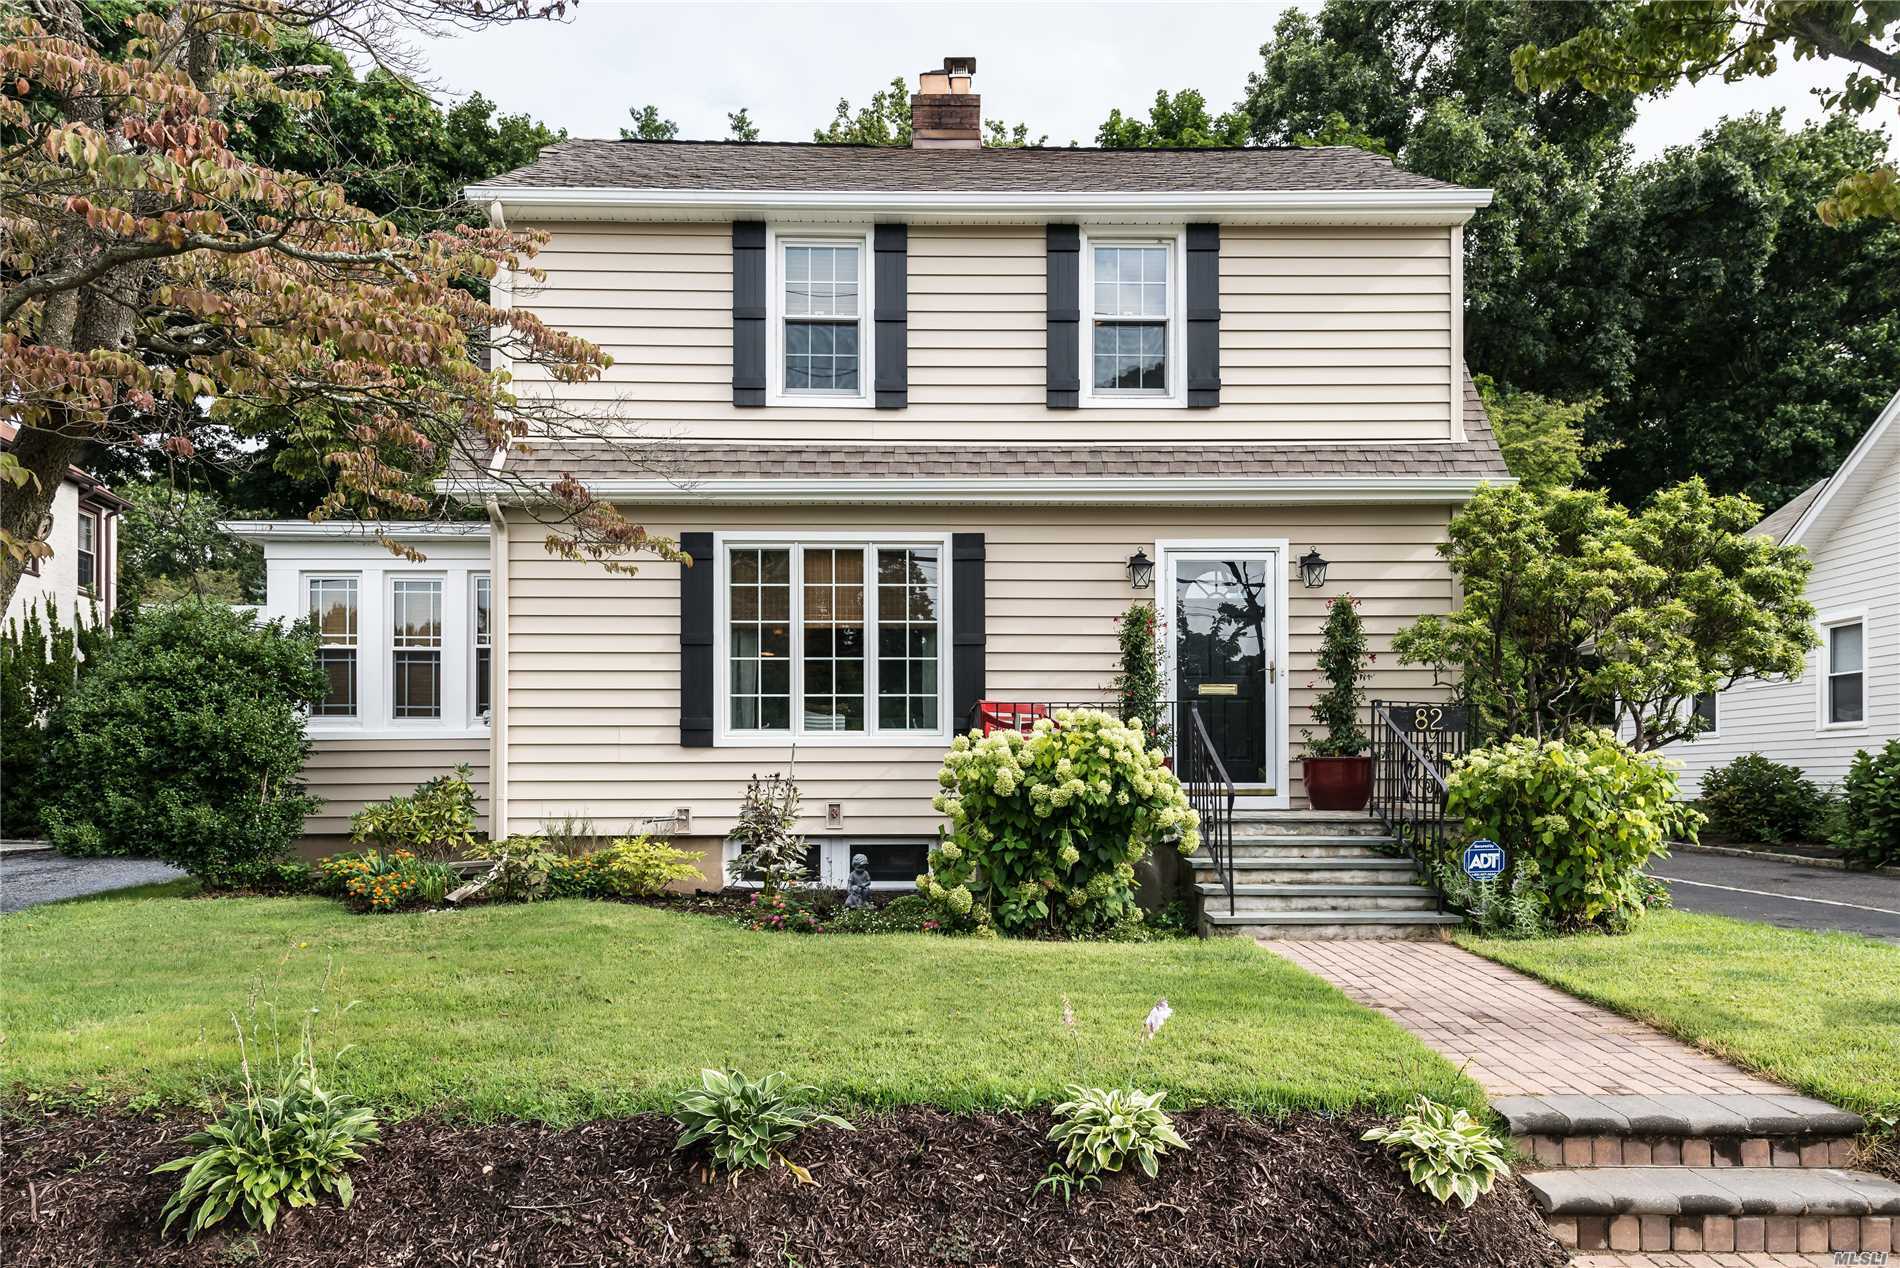 Simply Wonderful Village Colonial With Charm Throughout. Conveniently Located Near Village, Train, Schools. This House Has Sophisticated Quality And Potential To Expand With A Large Backyard And Separate Two Car Garage. Natural Gas For Cooking, Fireplaces And Hot Water.